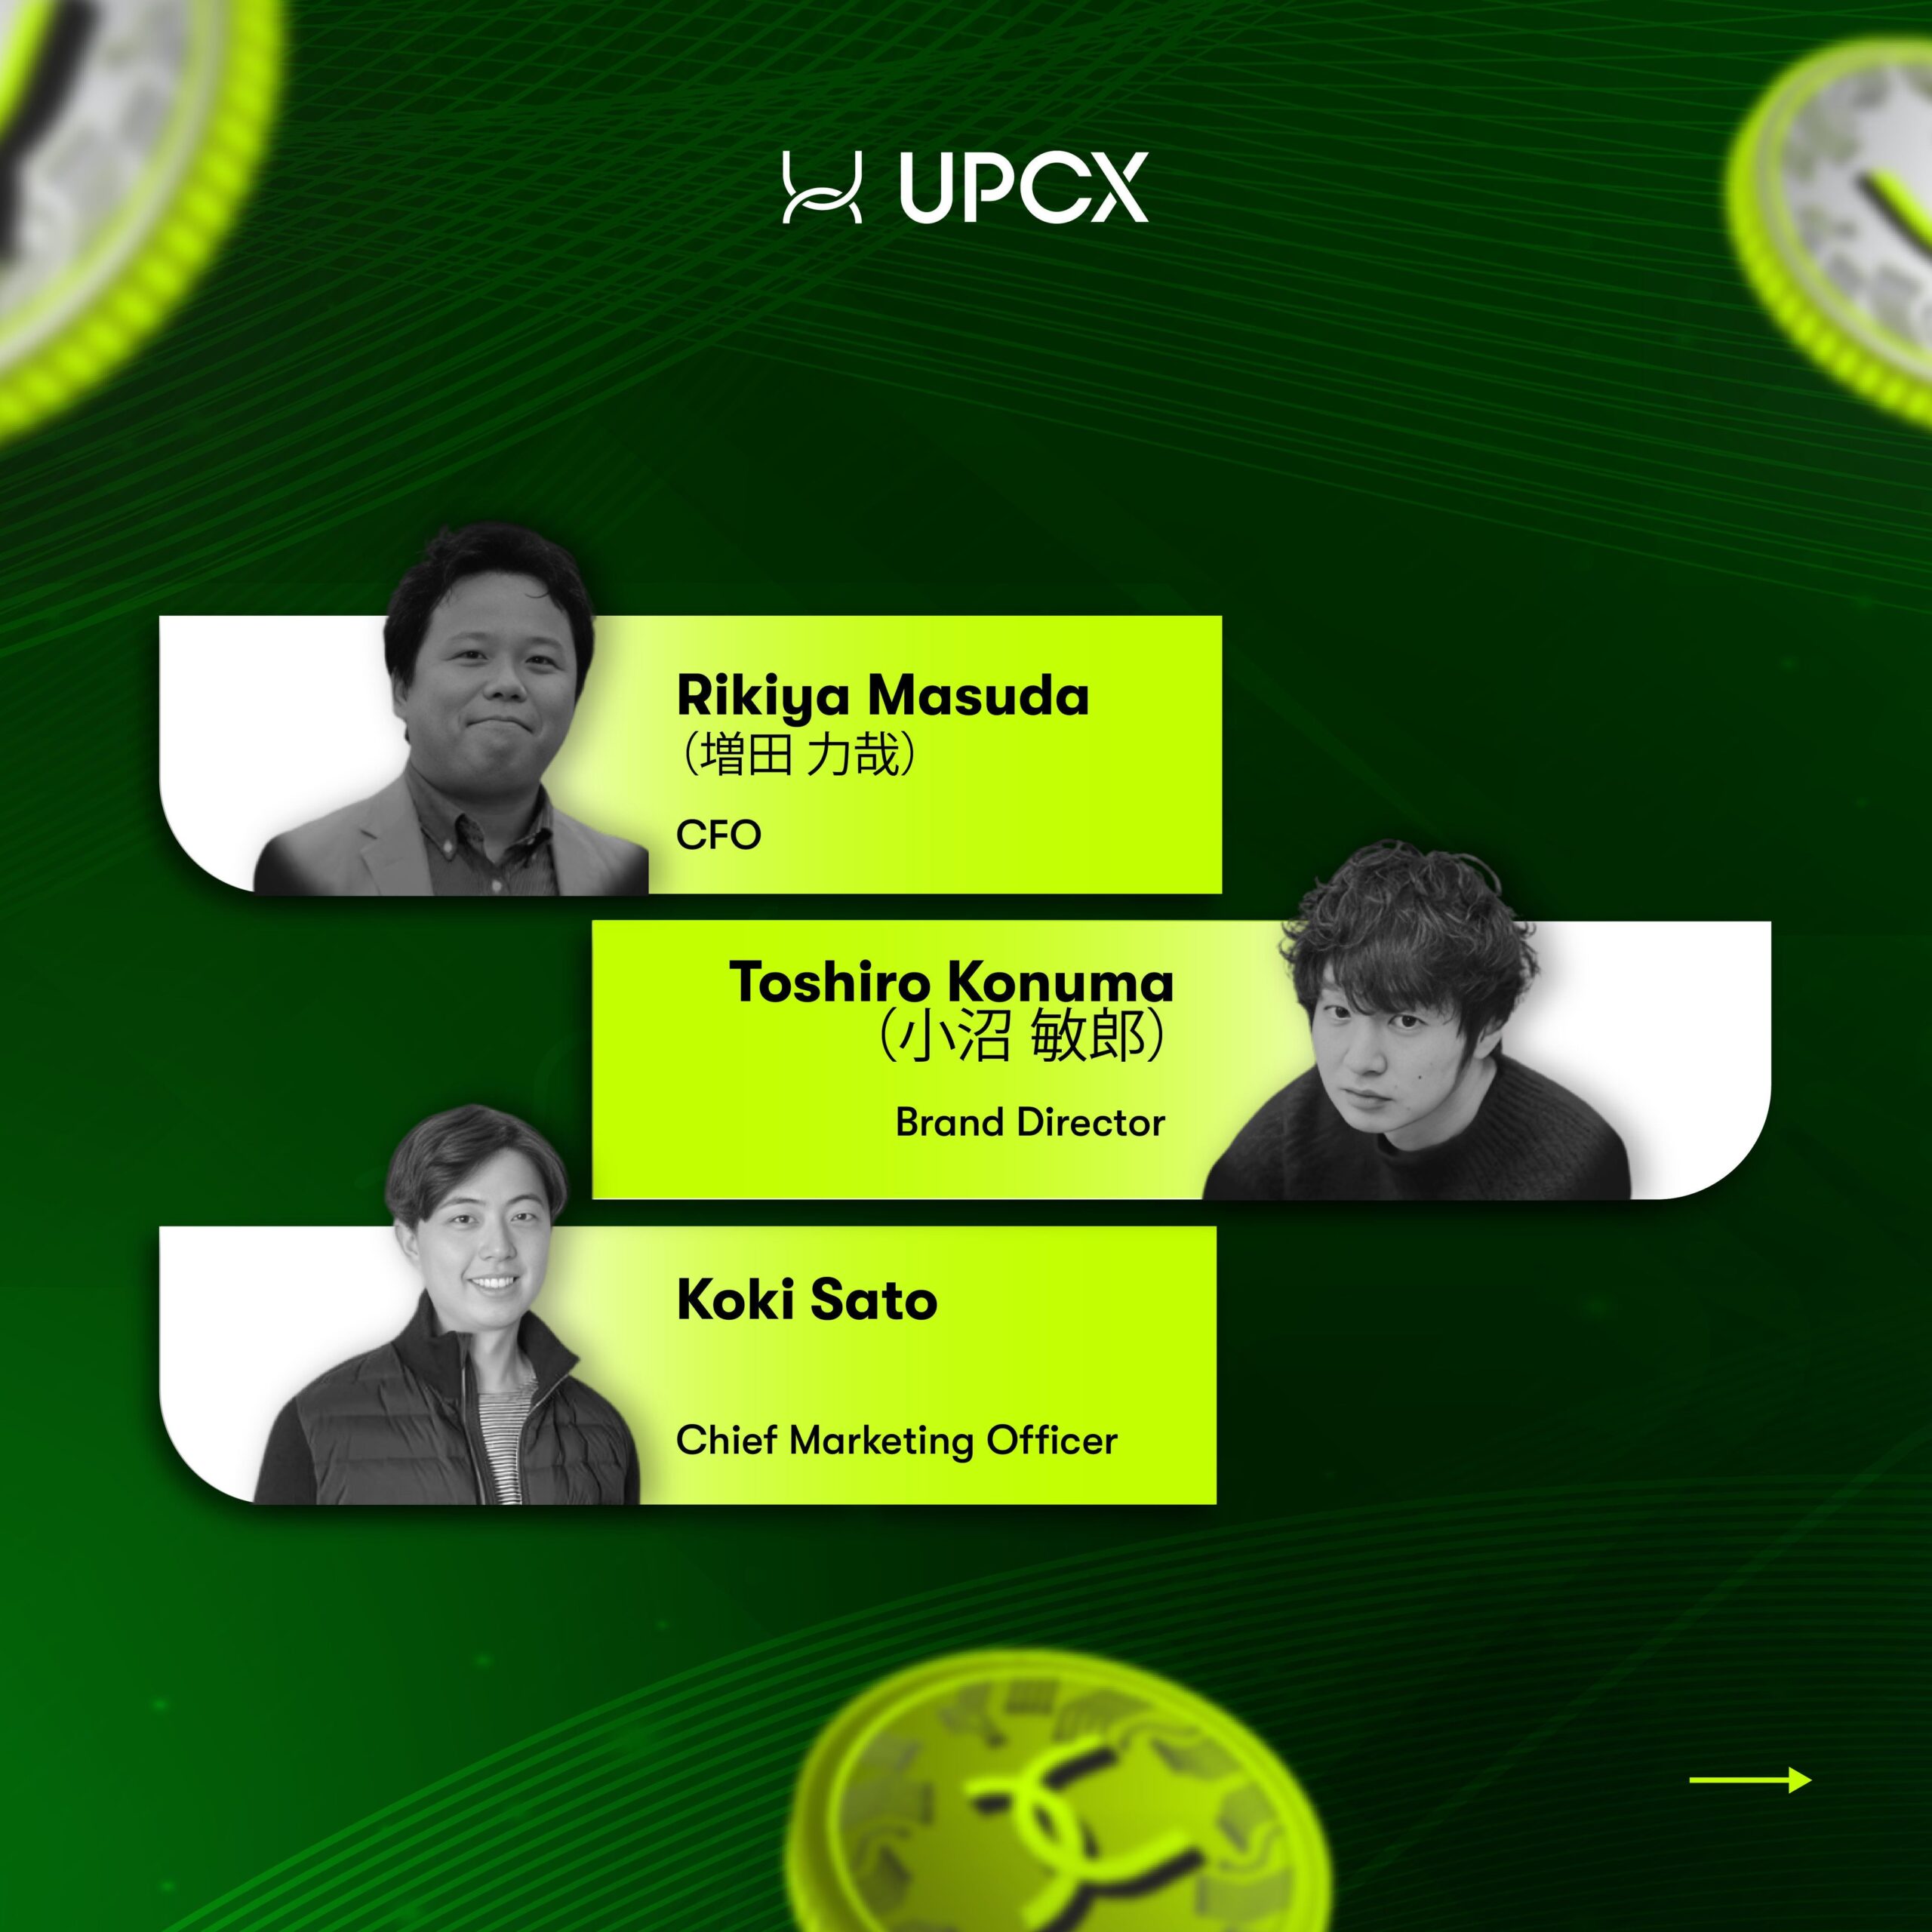 UPCX Appoints New CMO to Accelerate Strategic Planning and Compliance Process in Japan